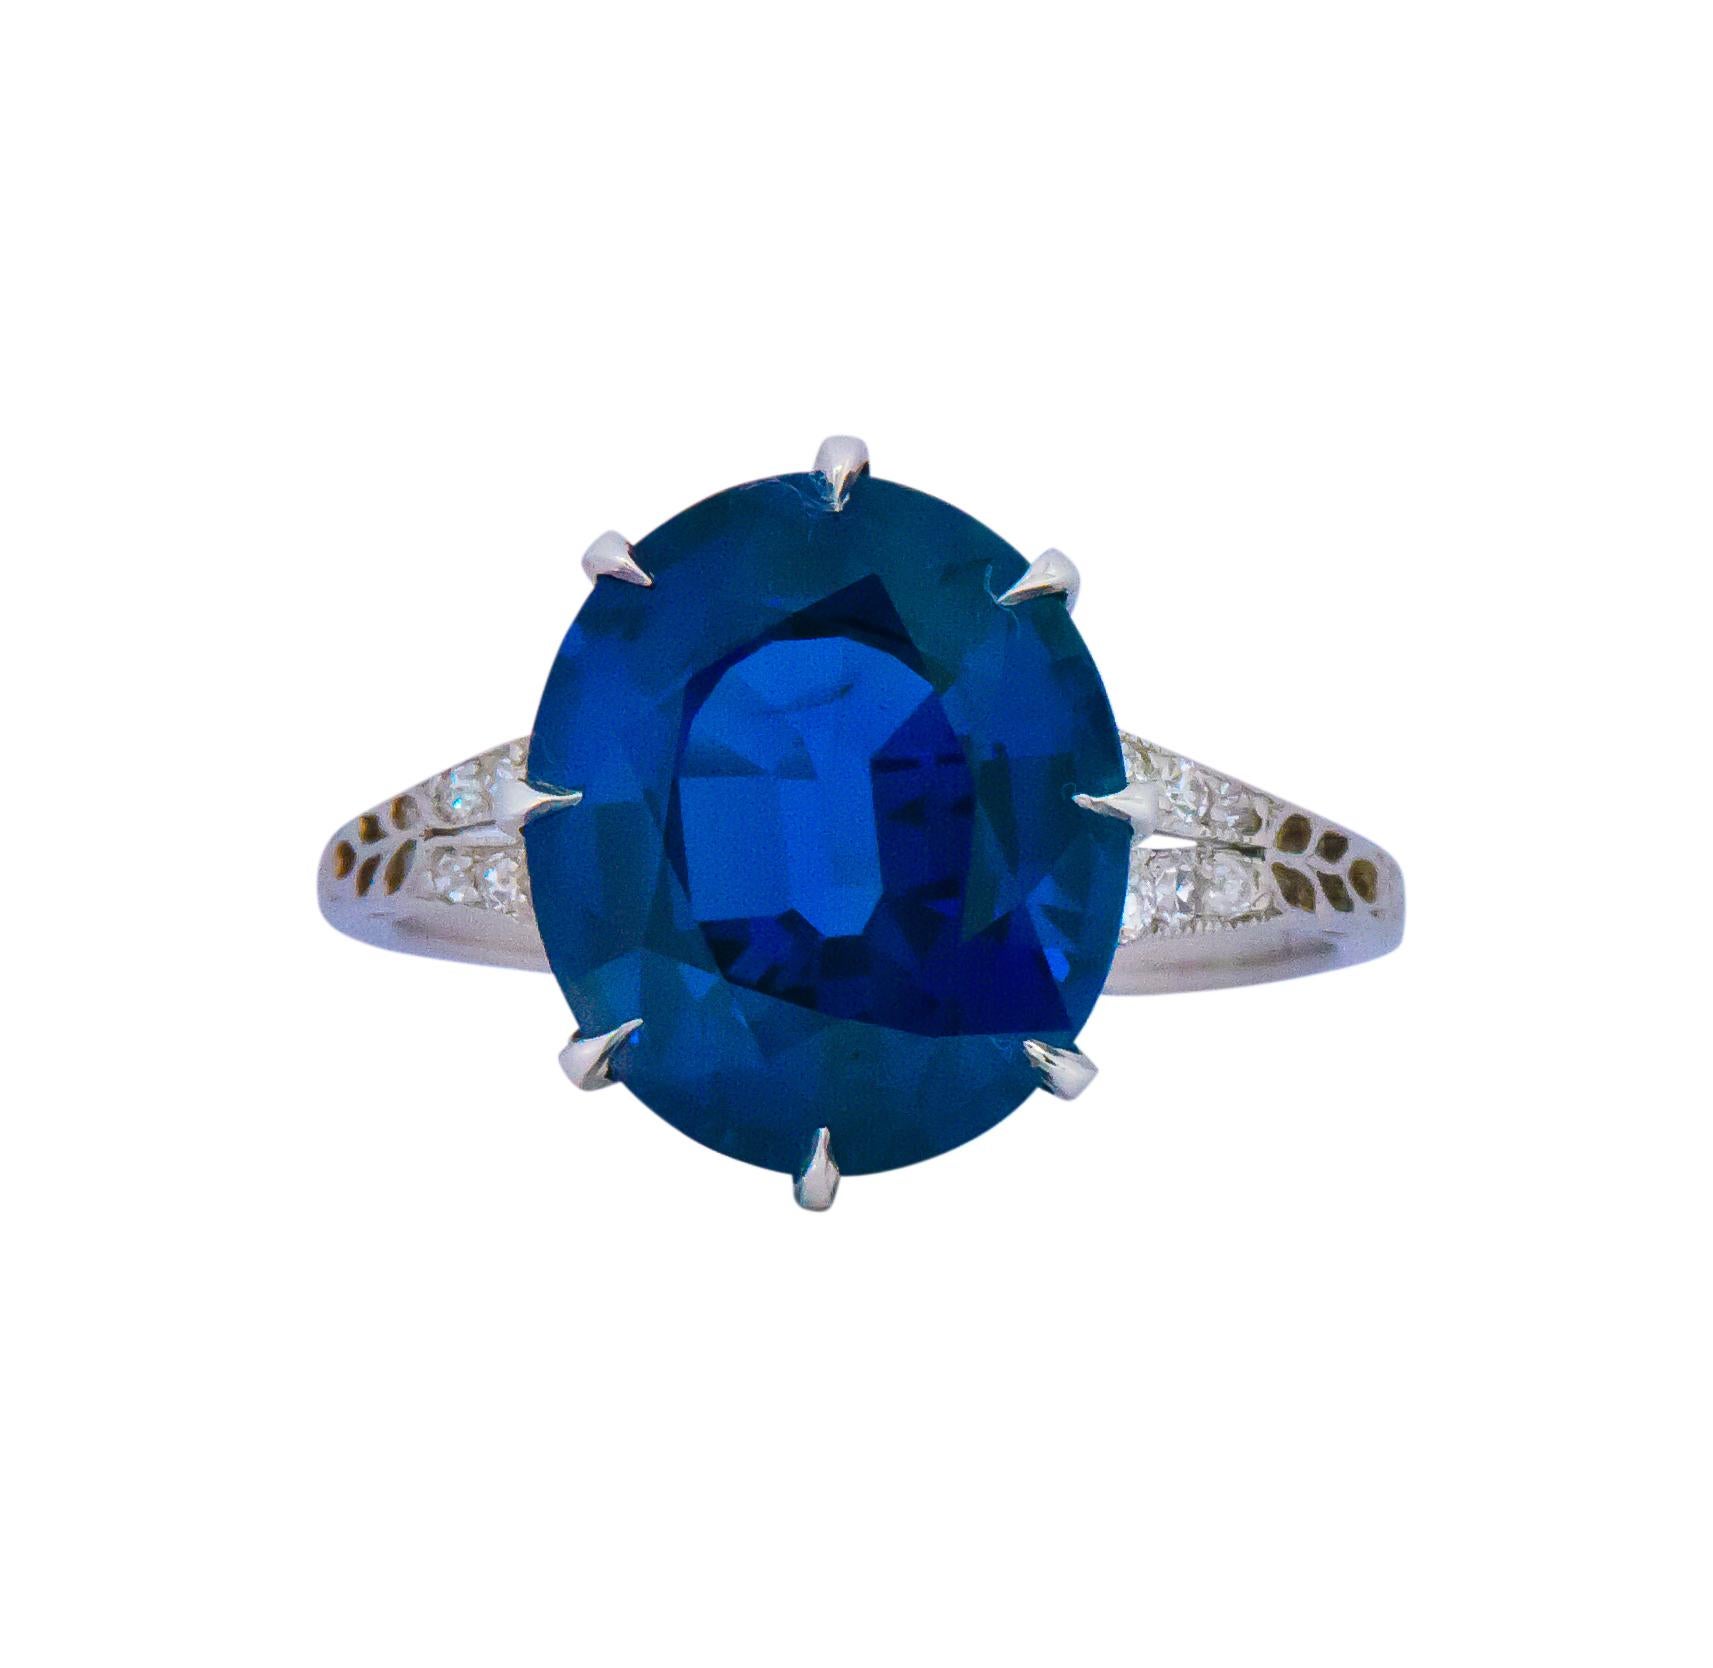 Centering an oval natural royal blue sapphire of intense color weighing 6.51 carats and securely set with 8 claw prongs

Numerous round diamond accents encircle the lower edge of the gallery which also features scrolled platinum designs hugging the